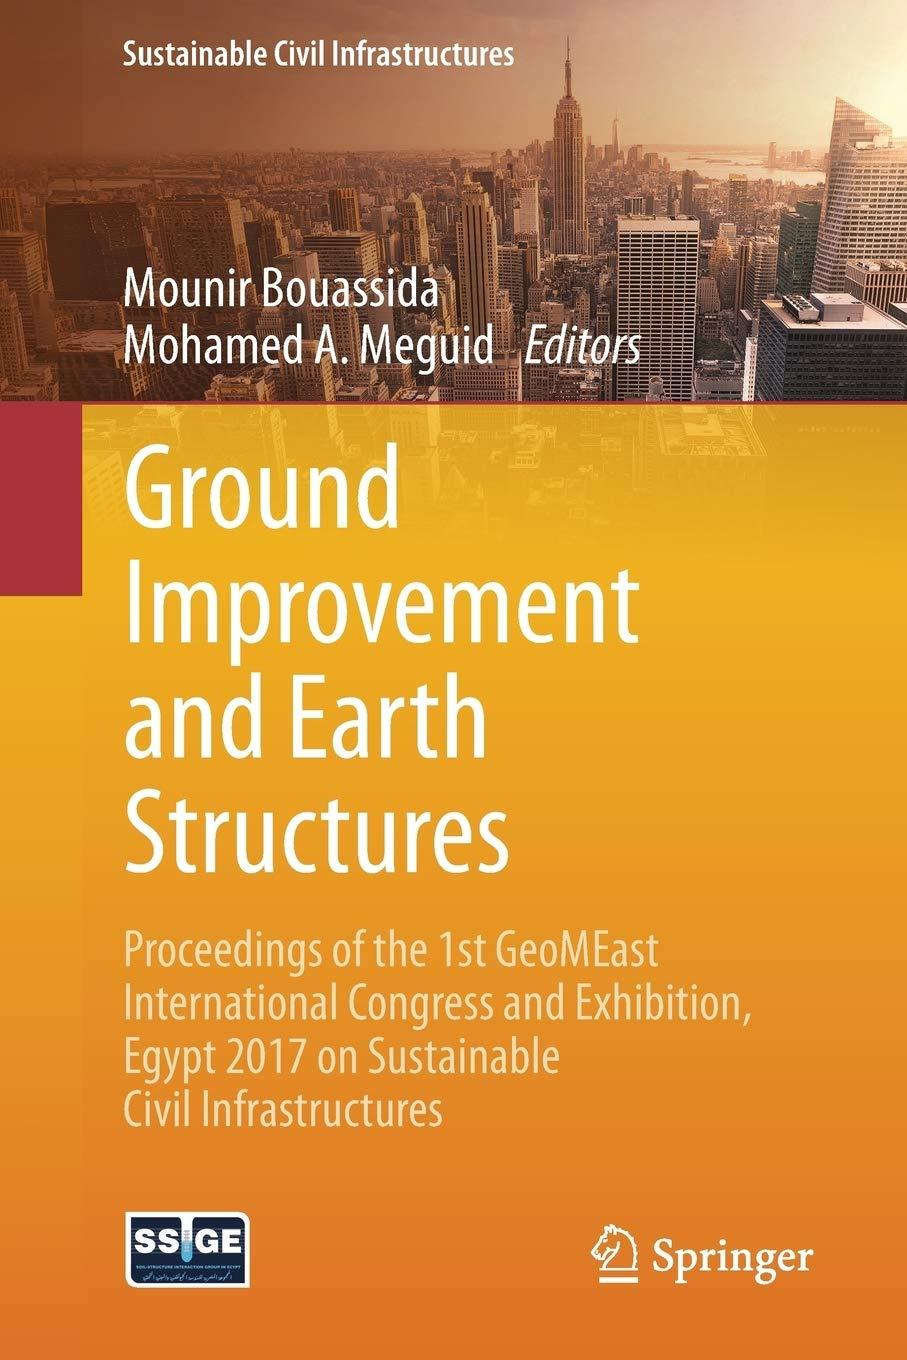 Ground Improvement And Earth Structures Proceedings Of The 1st GeoMEast International Congress And Exhibition Egypt 2017 On Sustainable Civil Infrastructures